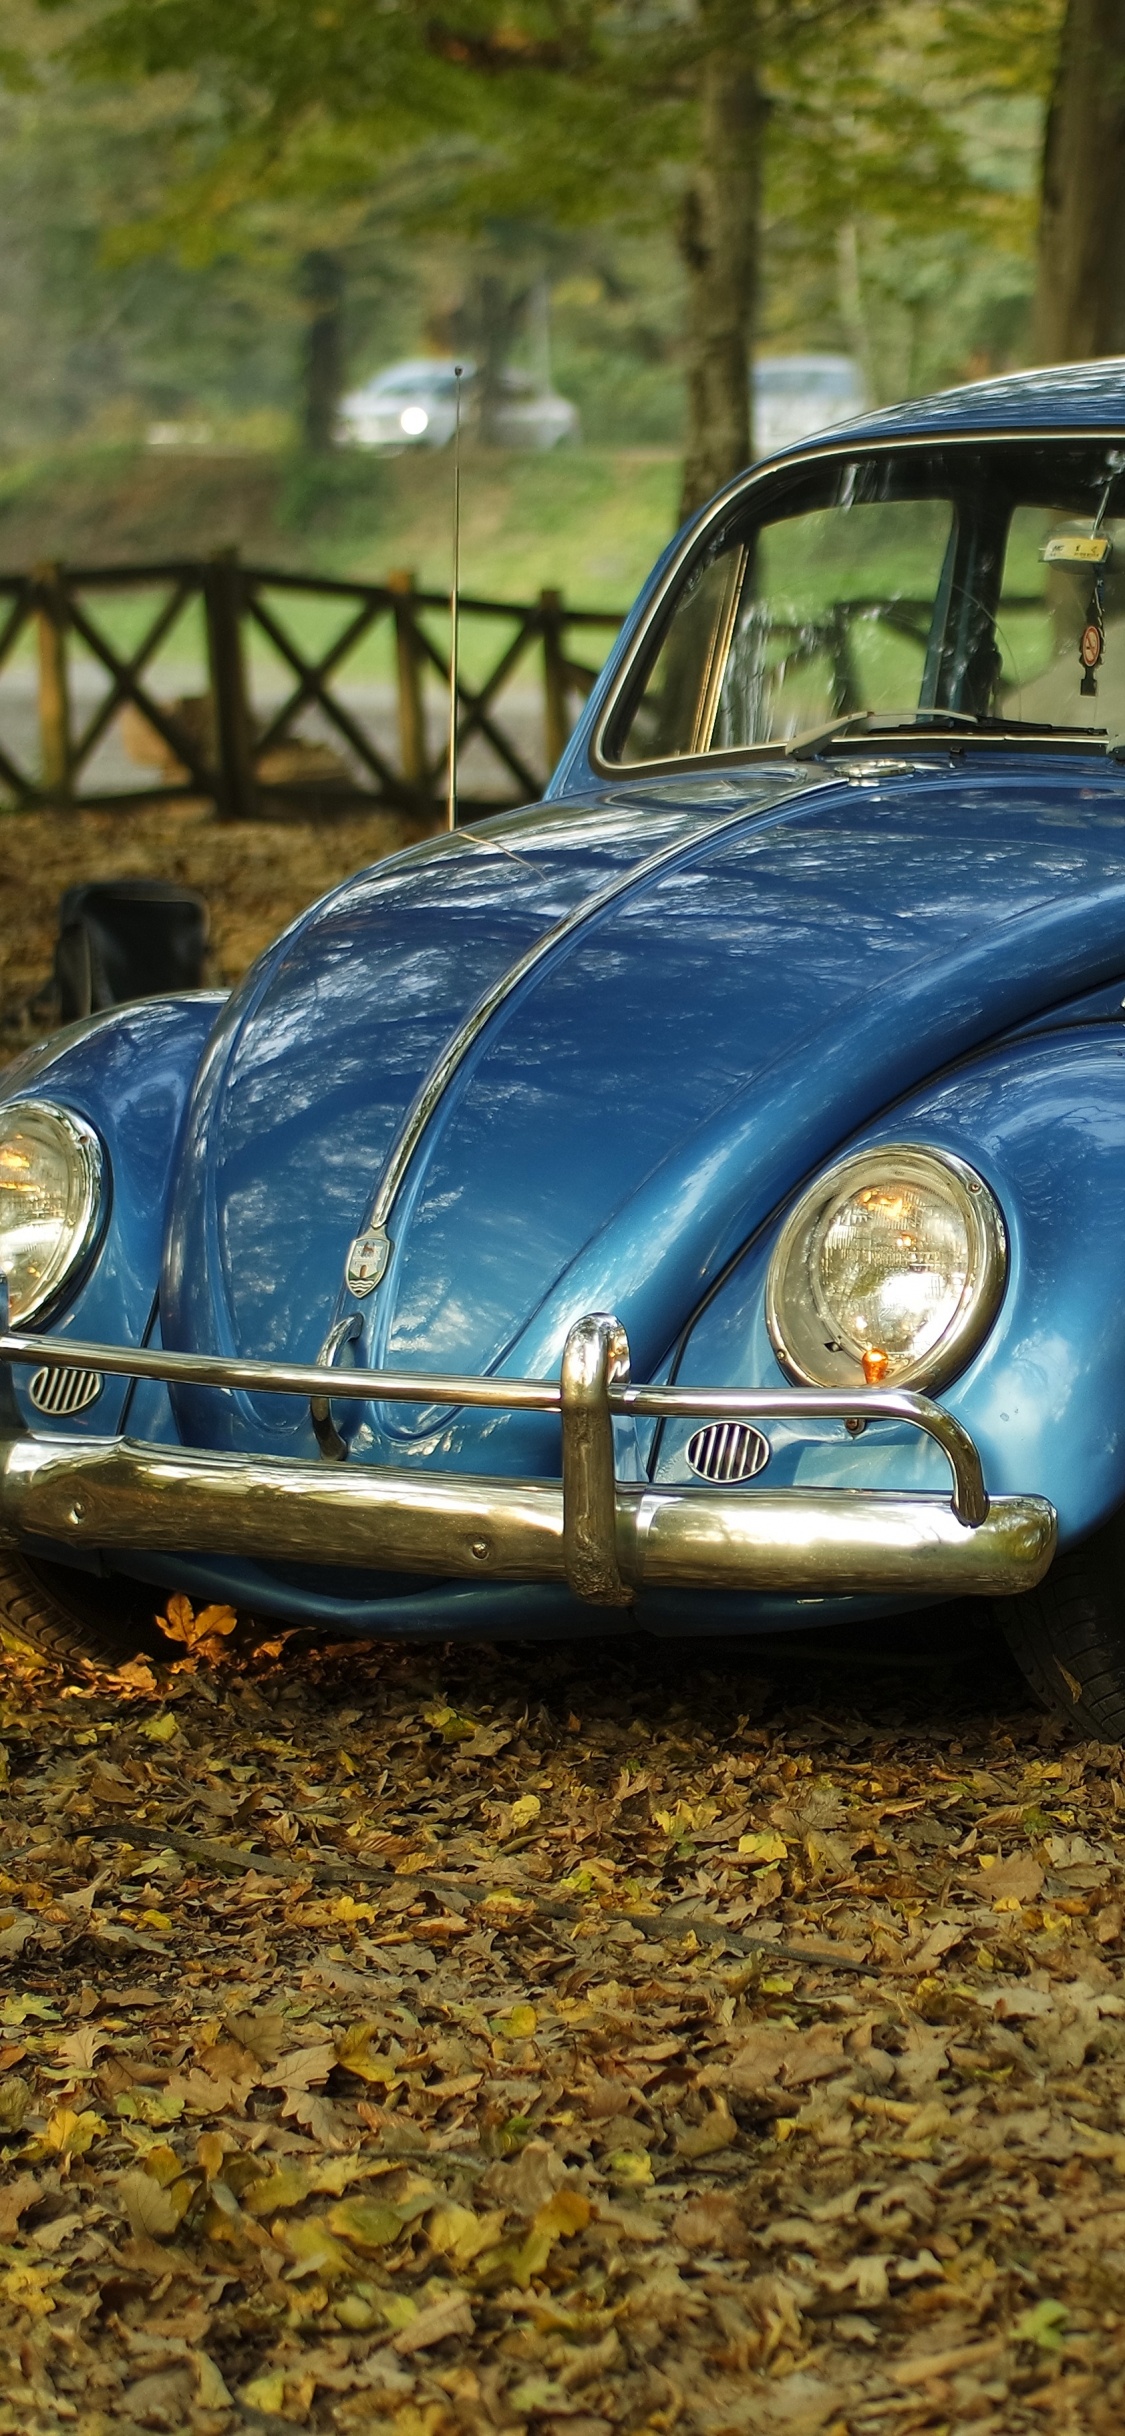 Blue Volkswagen Beetle on Brown Dried Leaves During Daytime. Wallpaper in 1125x2436 Resolution